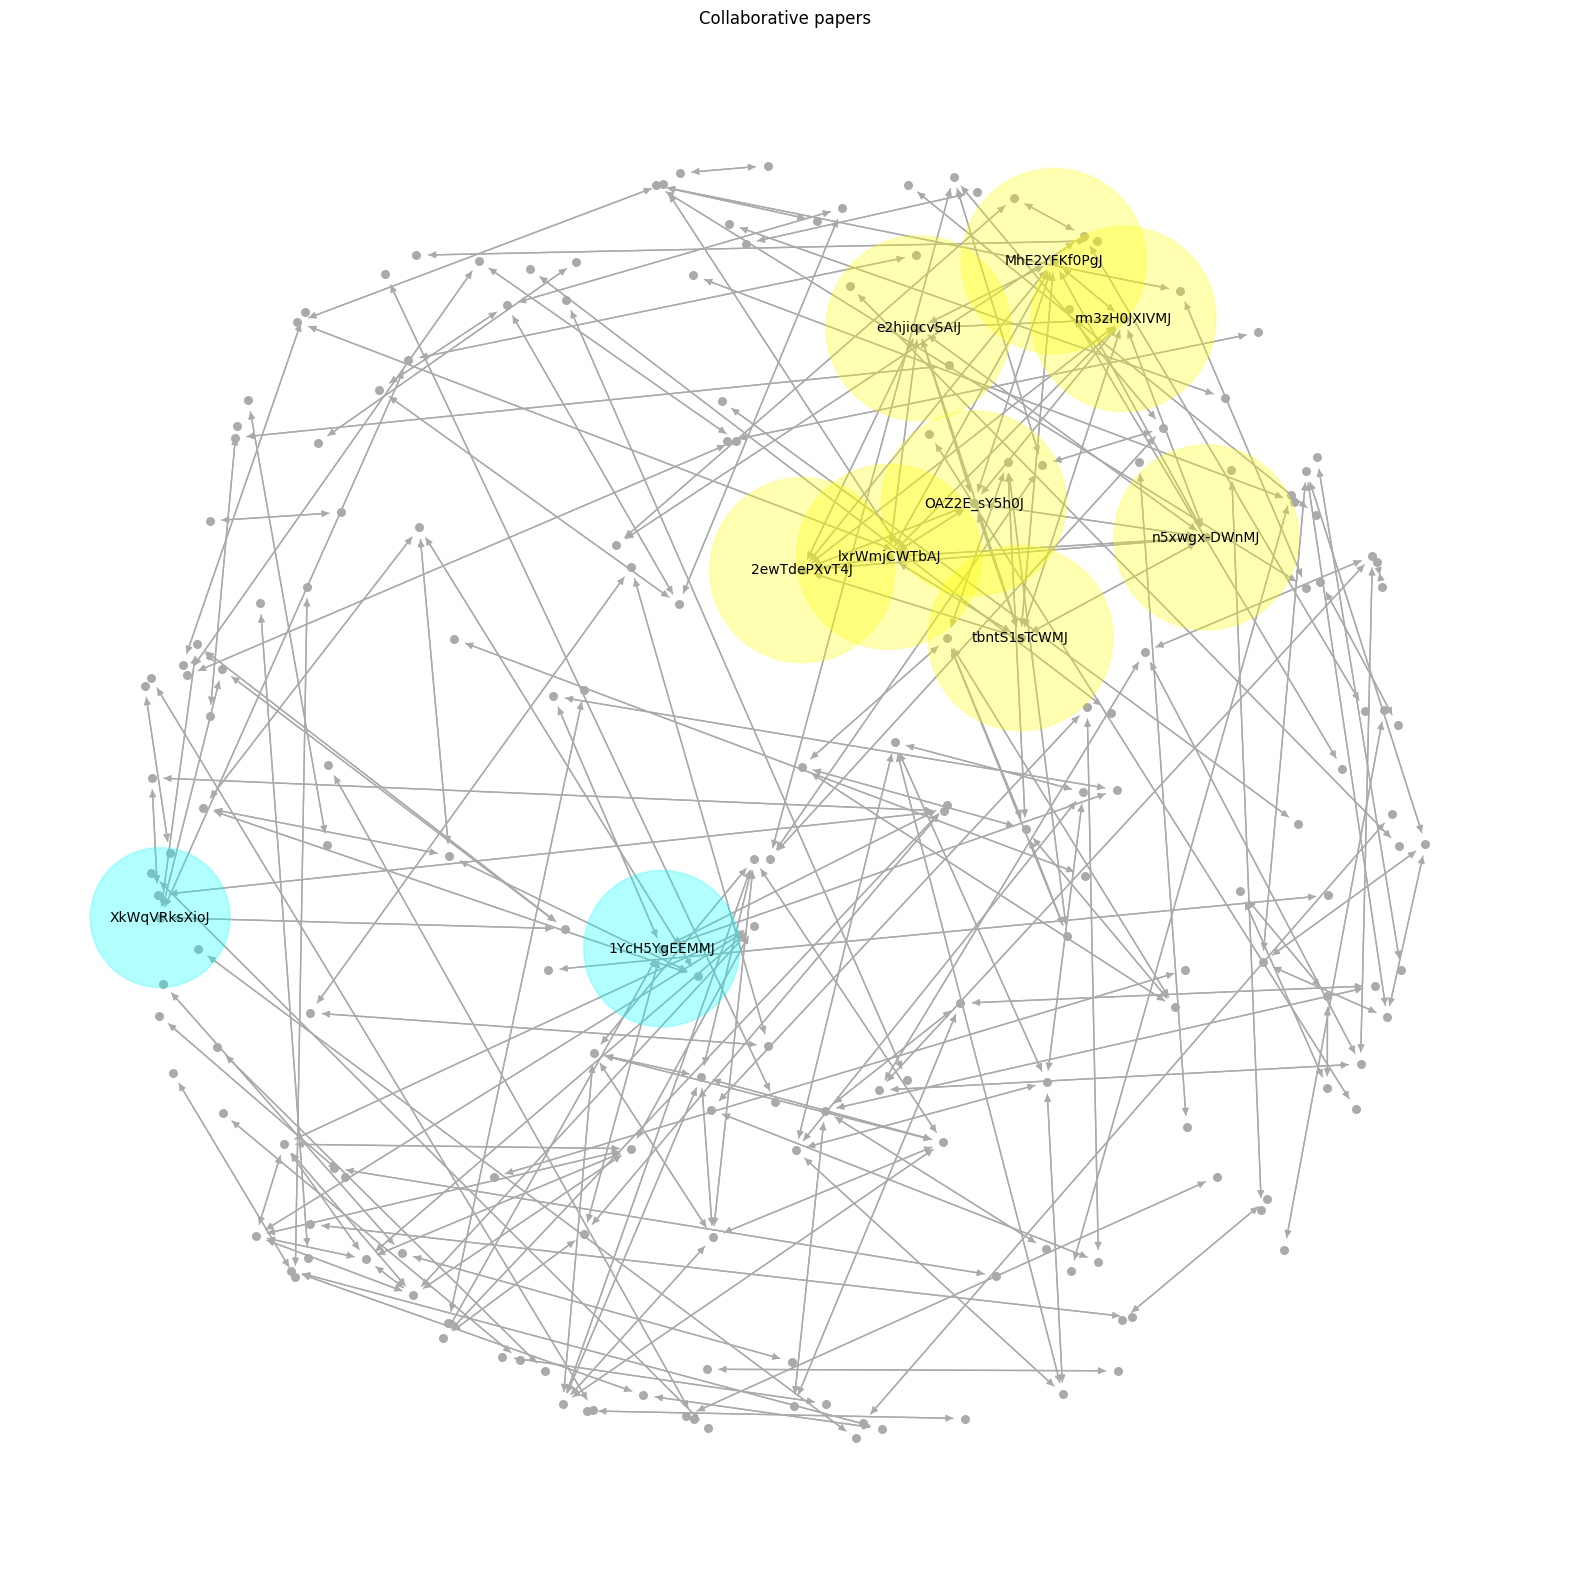 Visualizing central papers